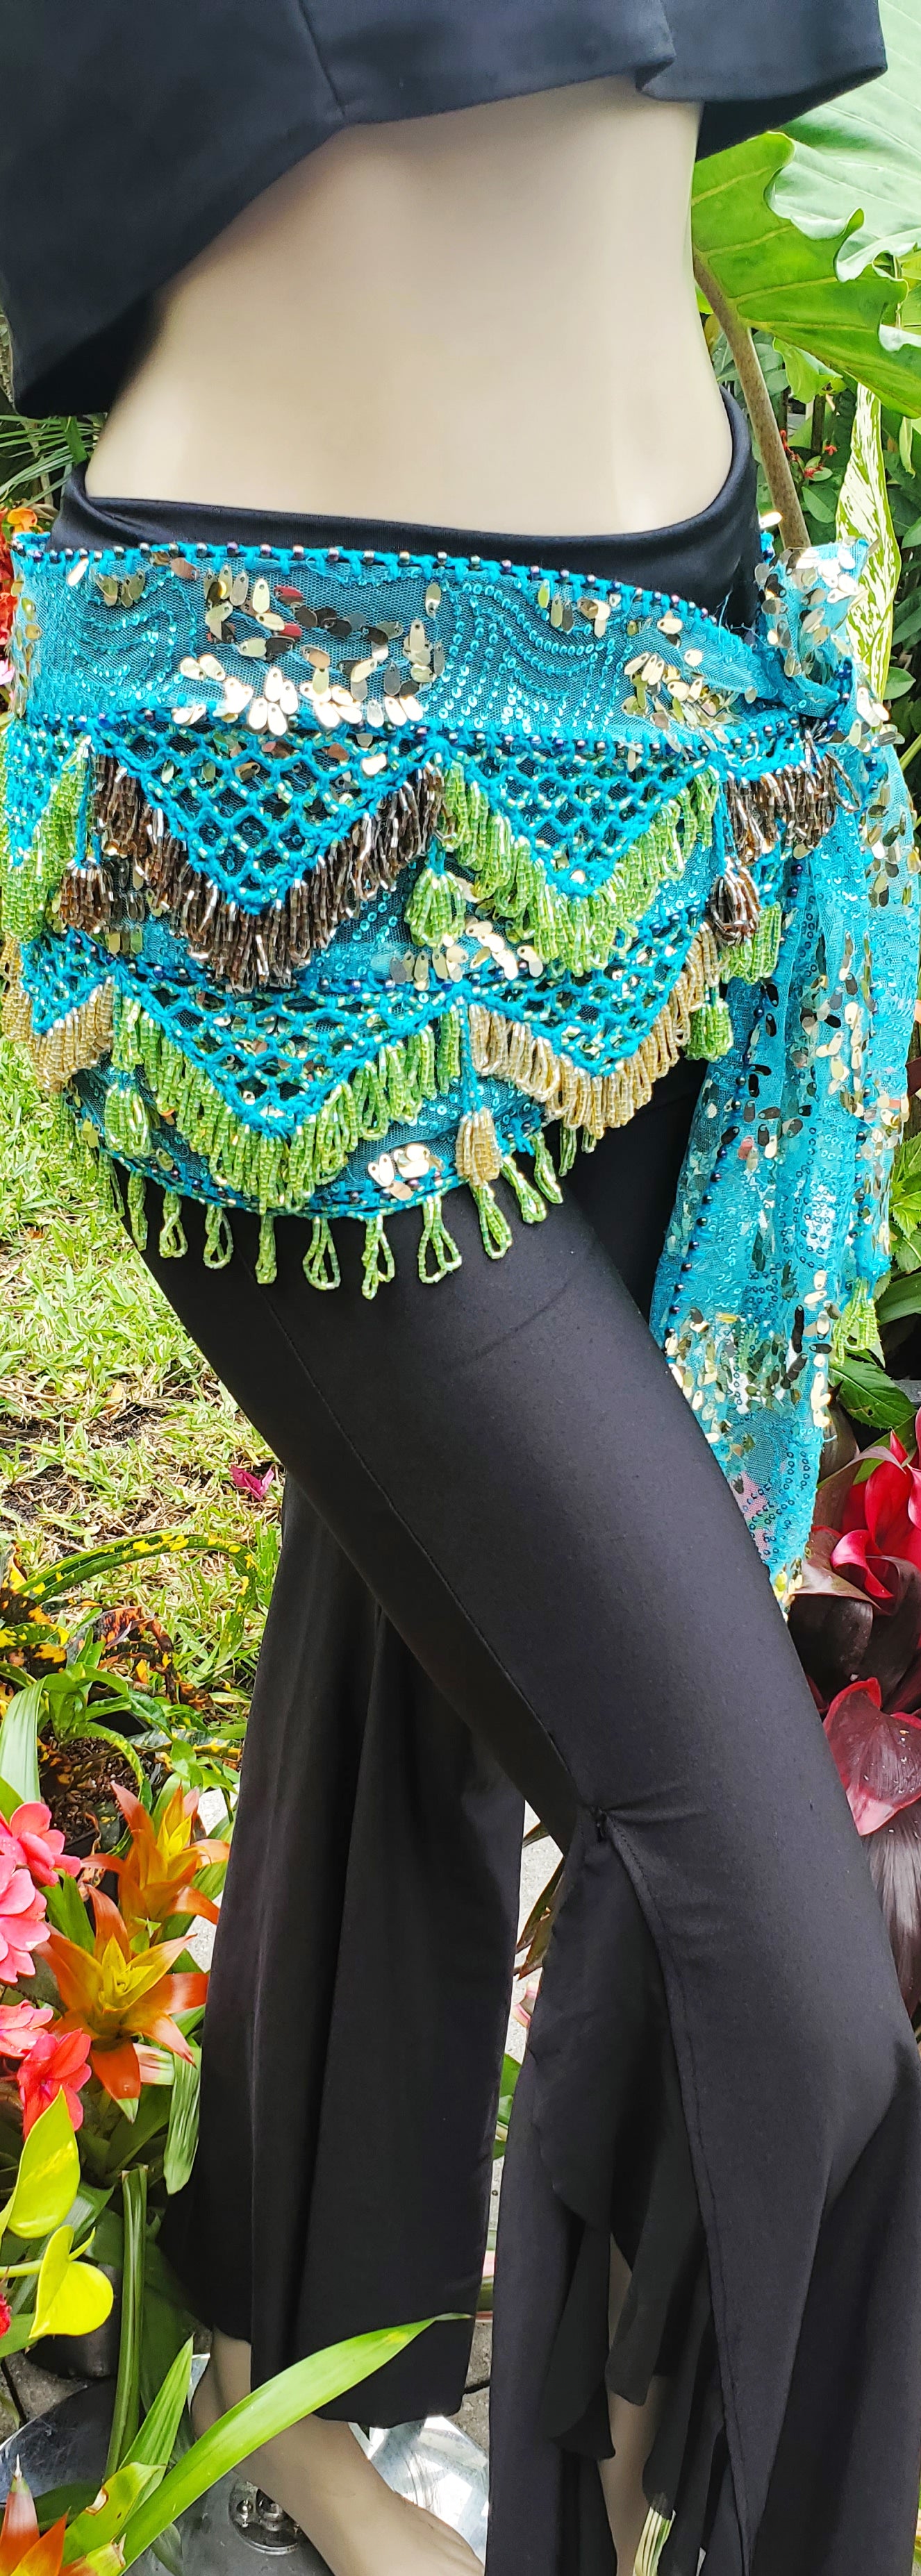 Hip Scarf with beads and sequins 24886